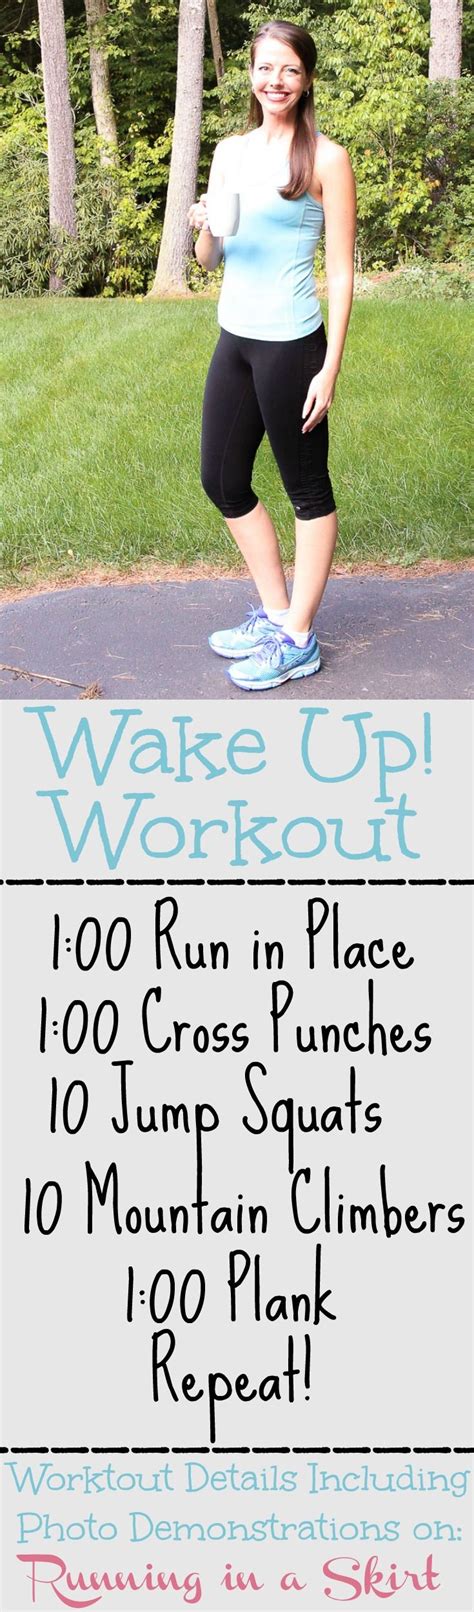 10 Minute Wake Up Workout Start Of Your Morning With This Fun Quick